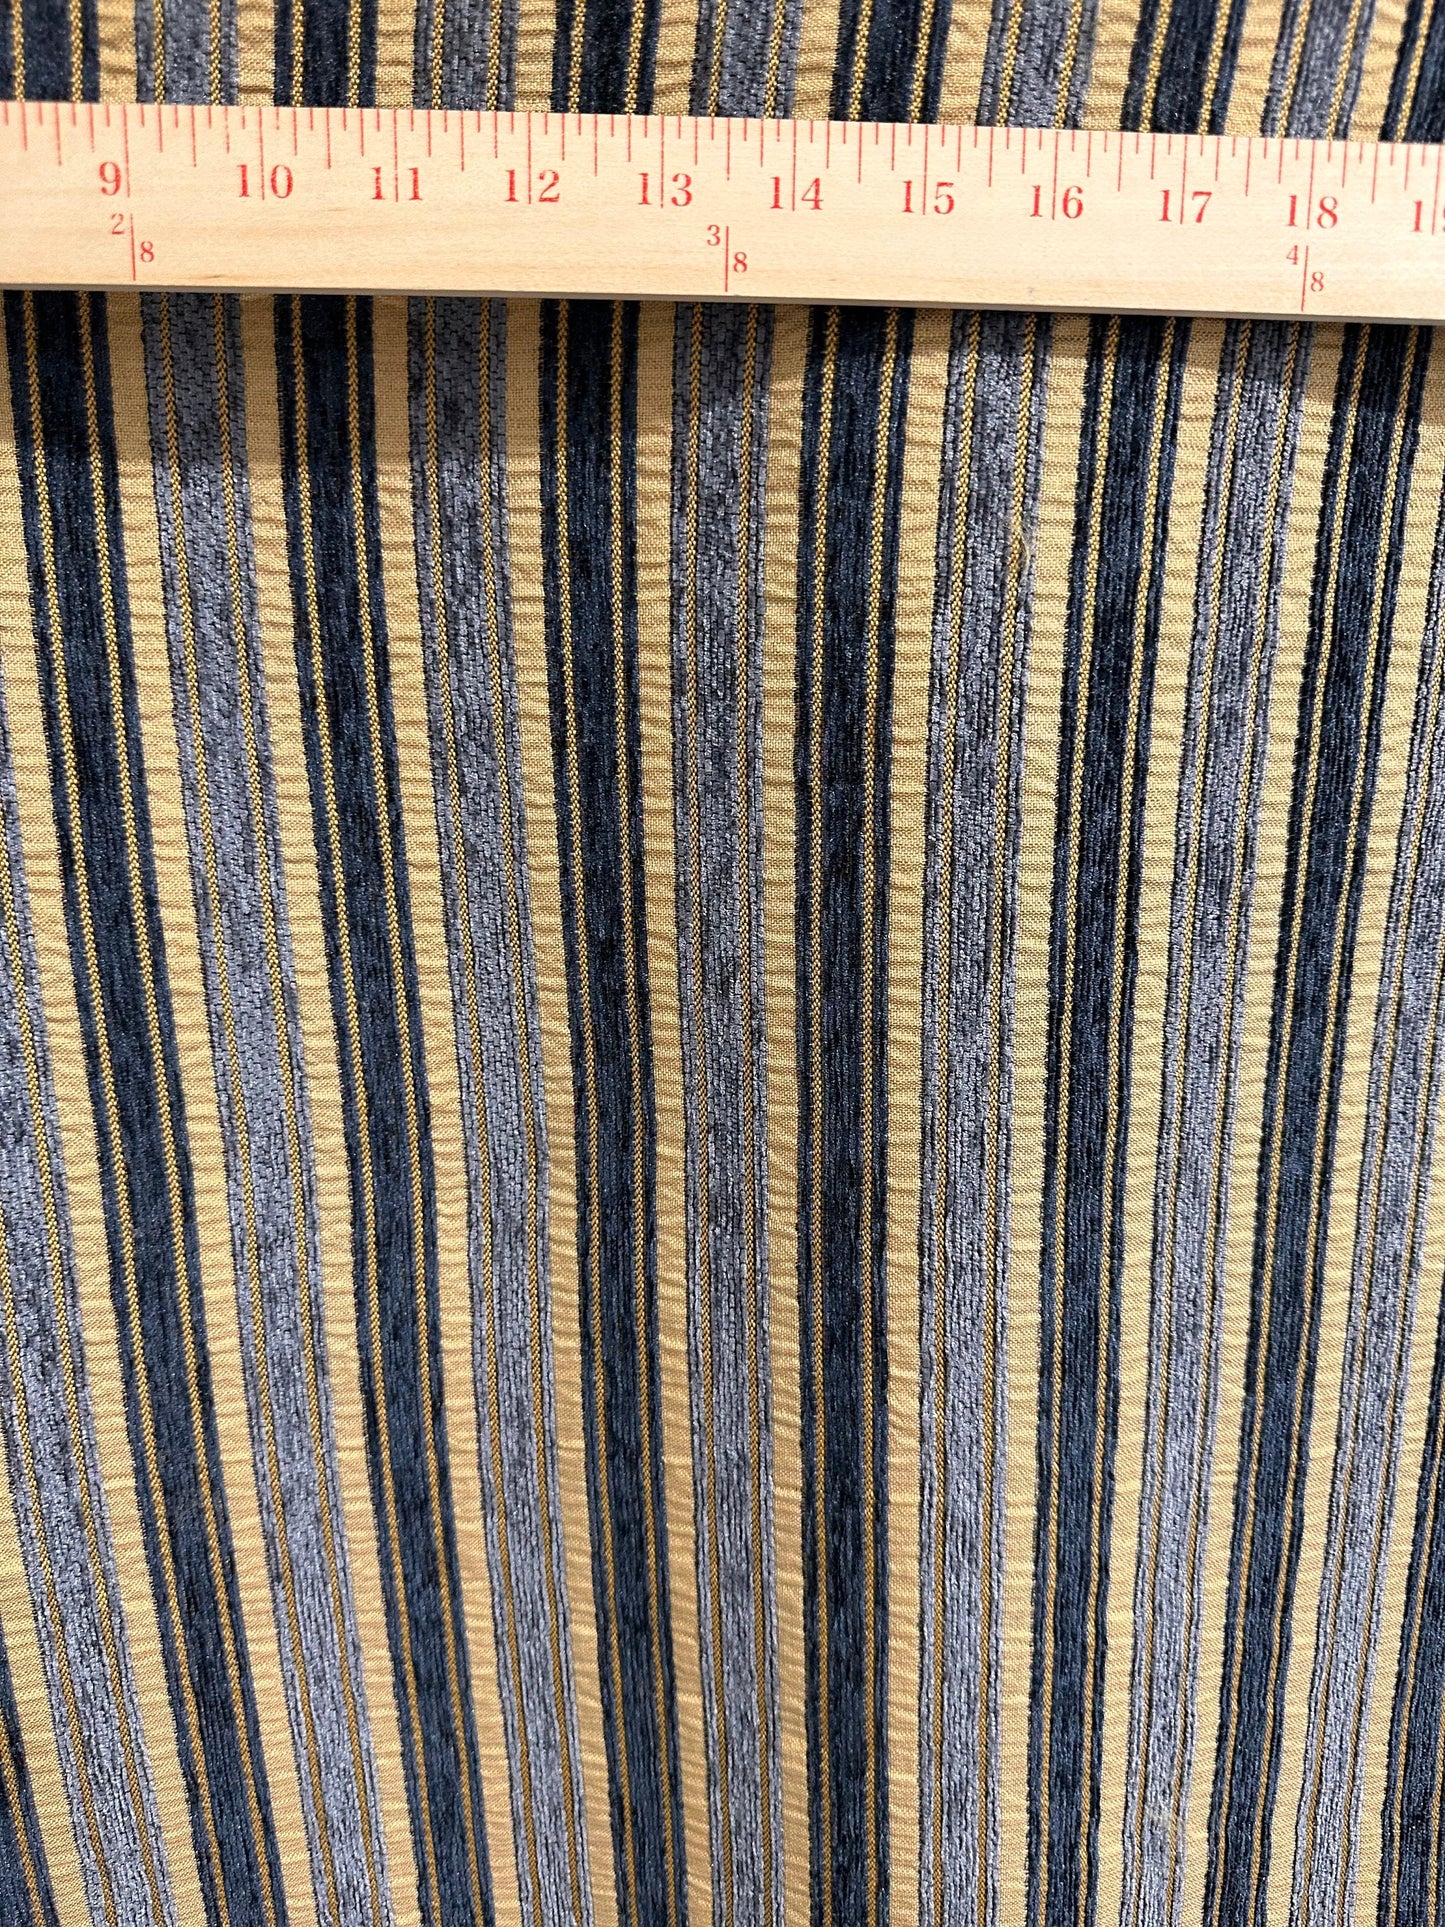 BLUE BEIGE Striped Chenille Upholstery Brocade Fabric (56 in.) Sold By The Yard